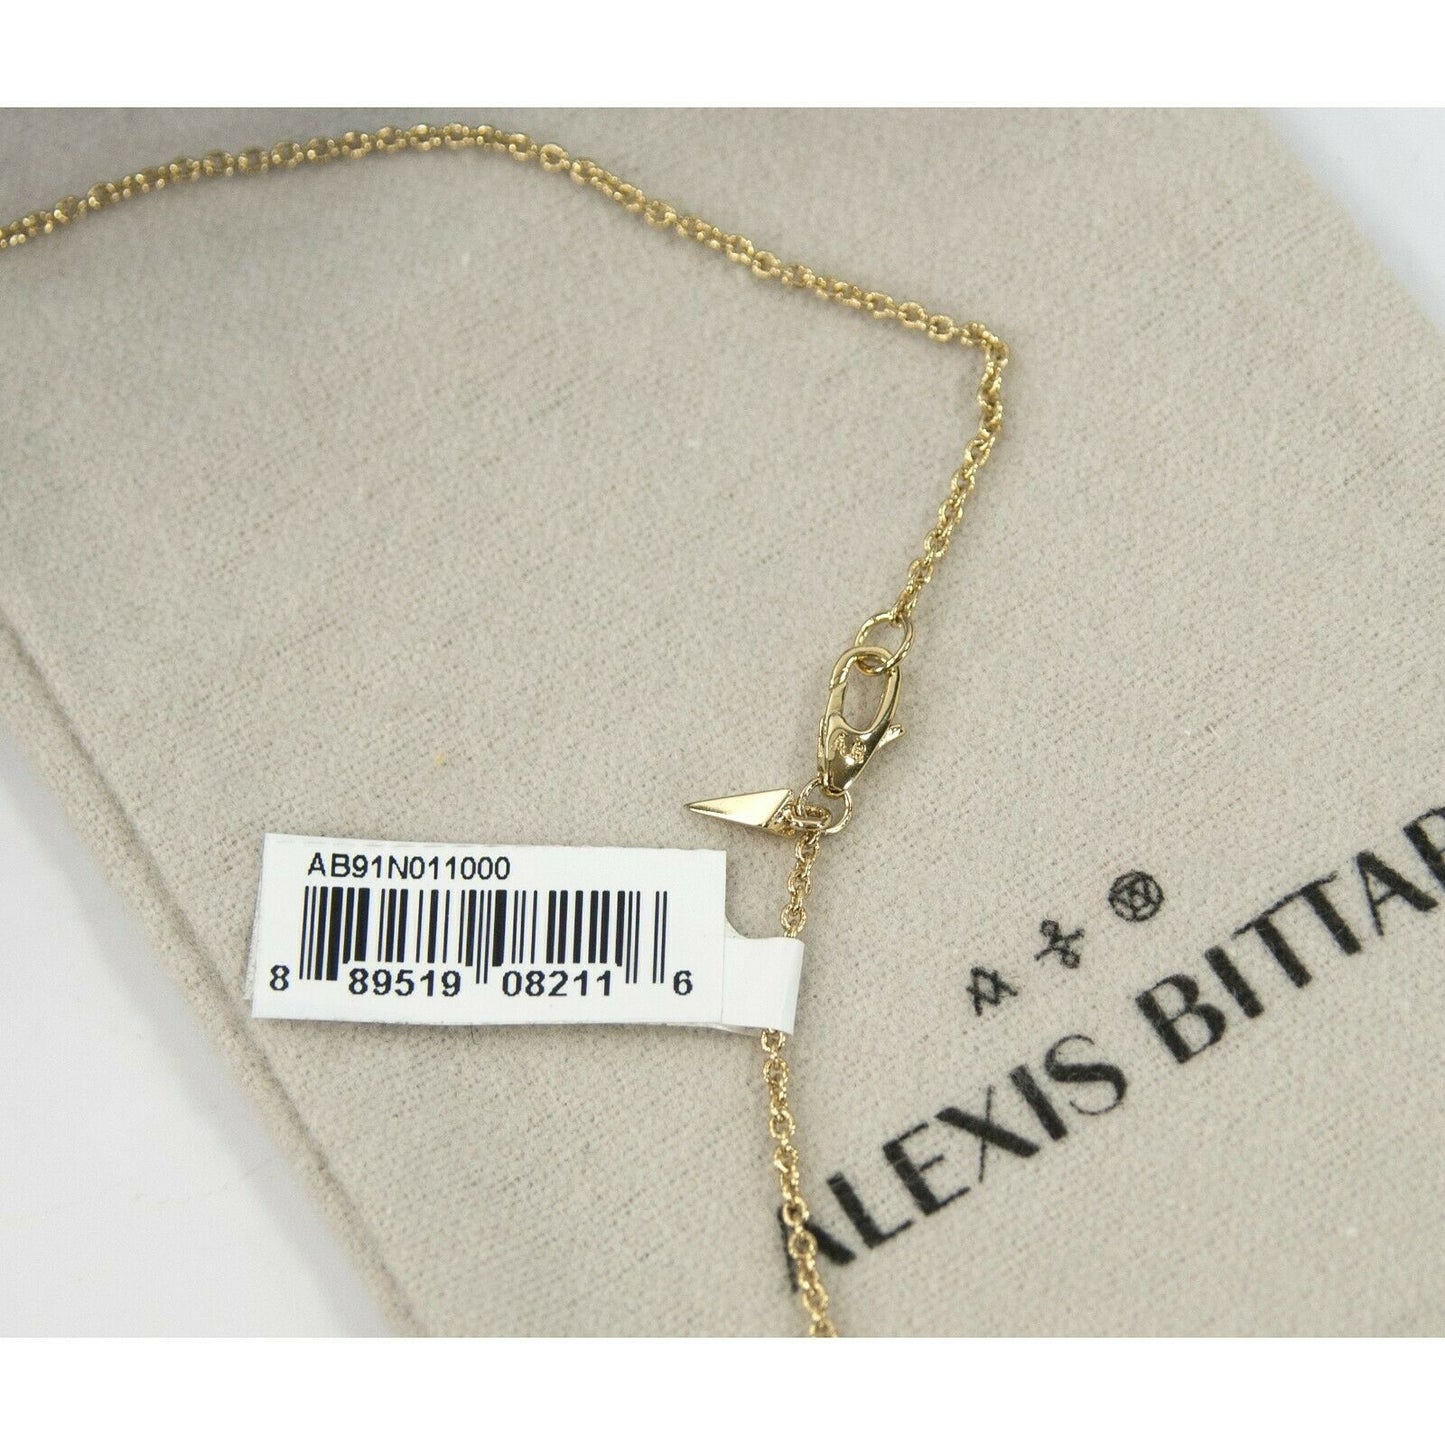 Alexis Bittar Crystal Lucite Liquid Spike Long Pendant Statement Necklace NWT